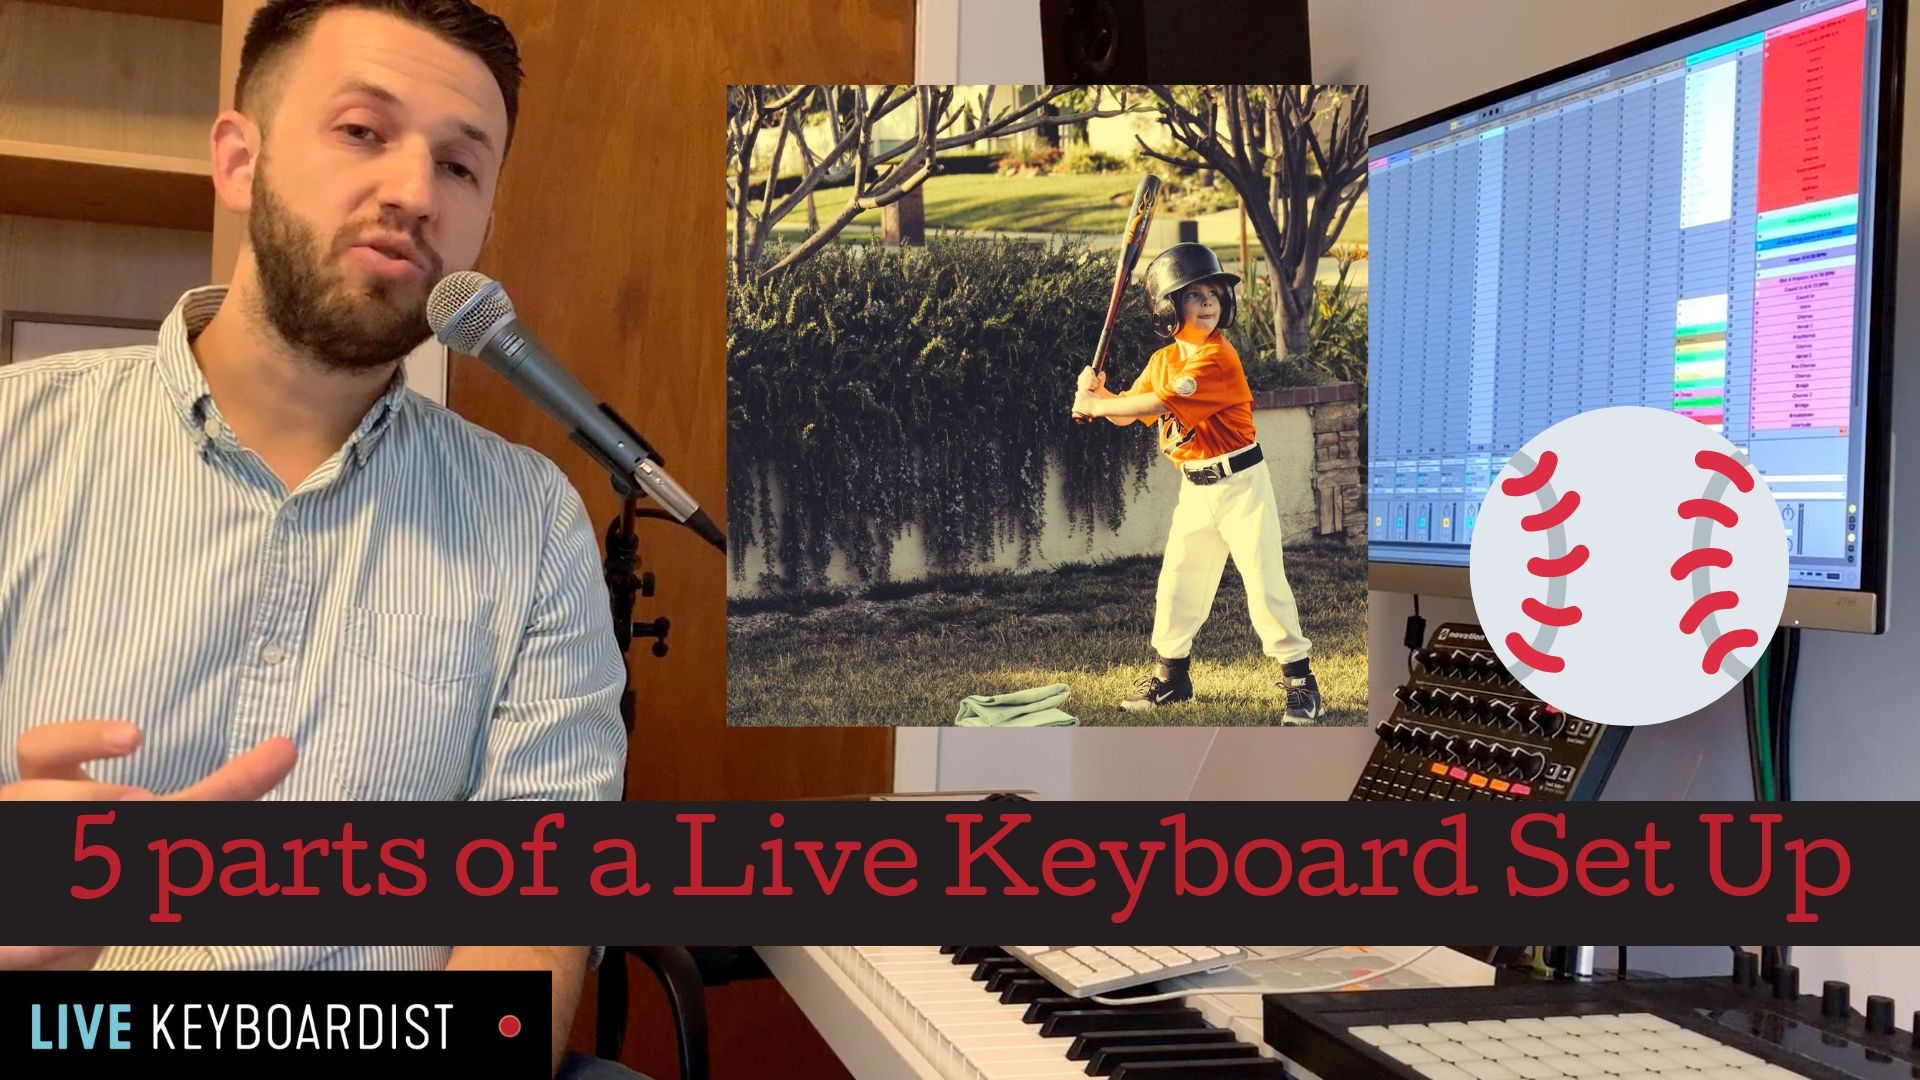 Does Your Live Keyboard Rig Cover All The Bases?